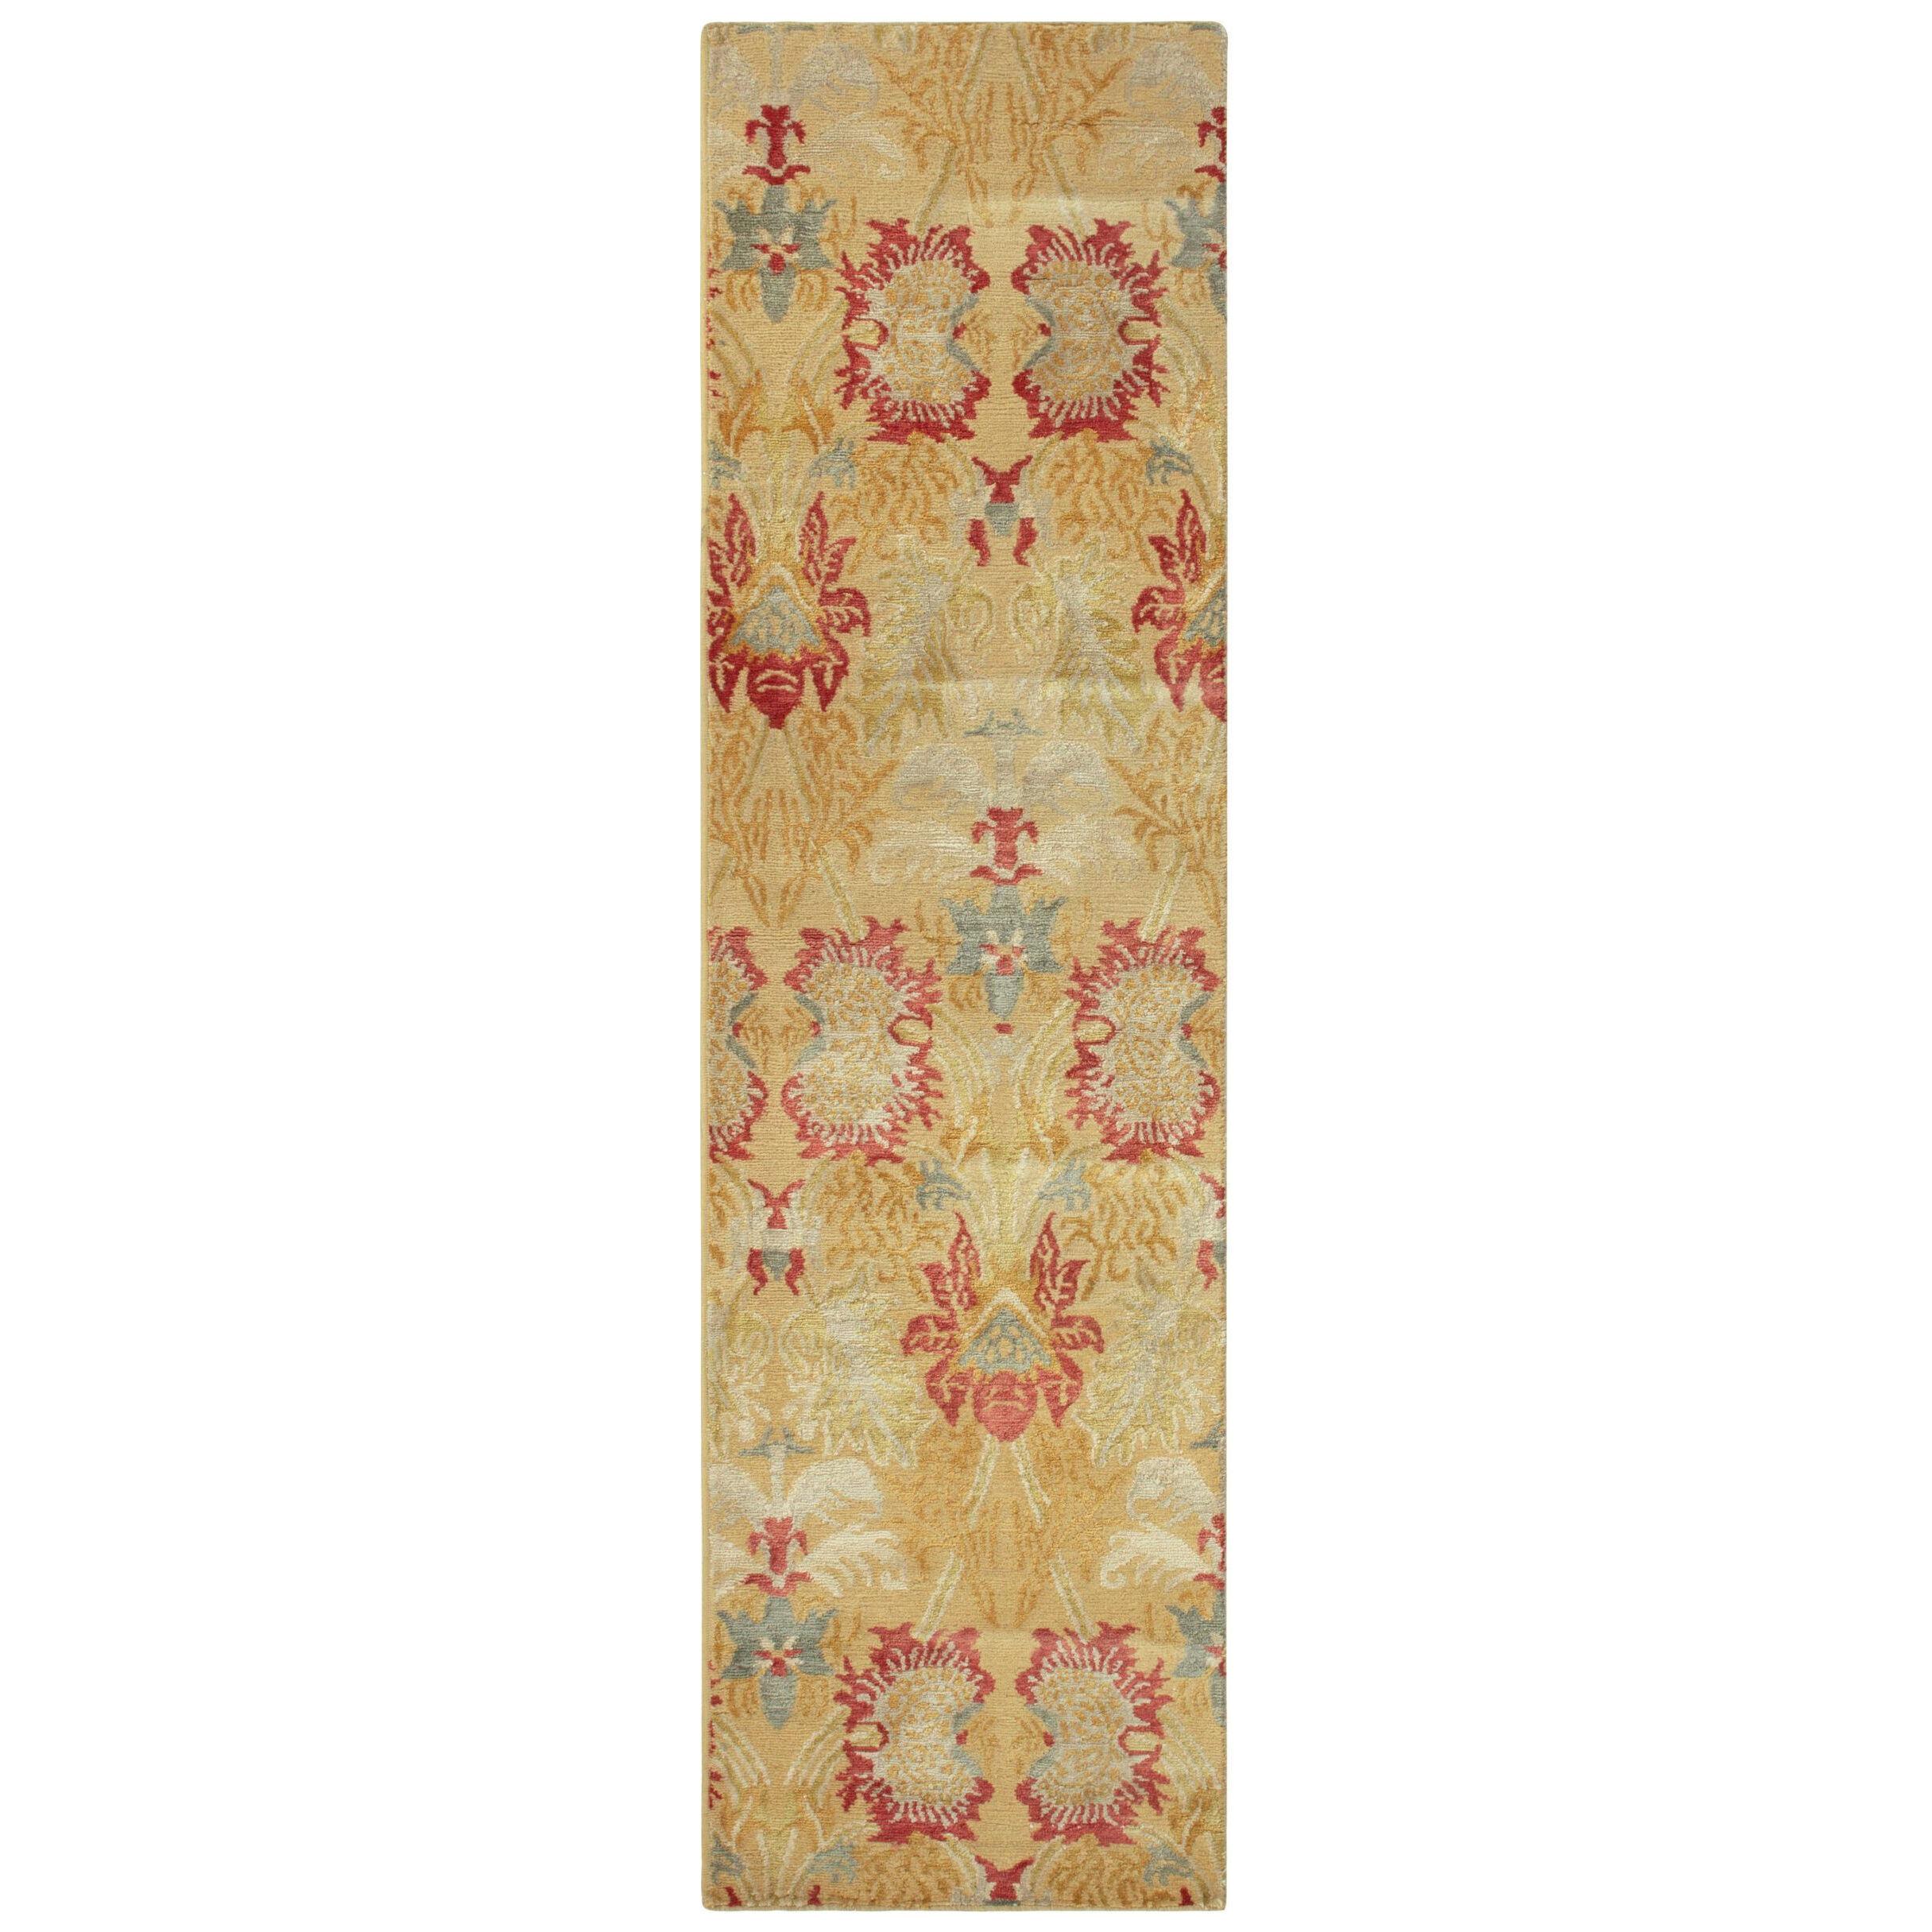 Spanish European Style Runner In Gold, Red & Blue Floral Pattern By Rug & Kilim